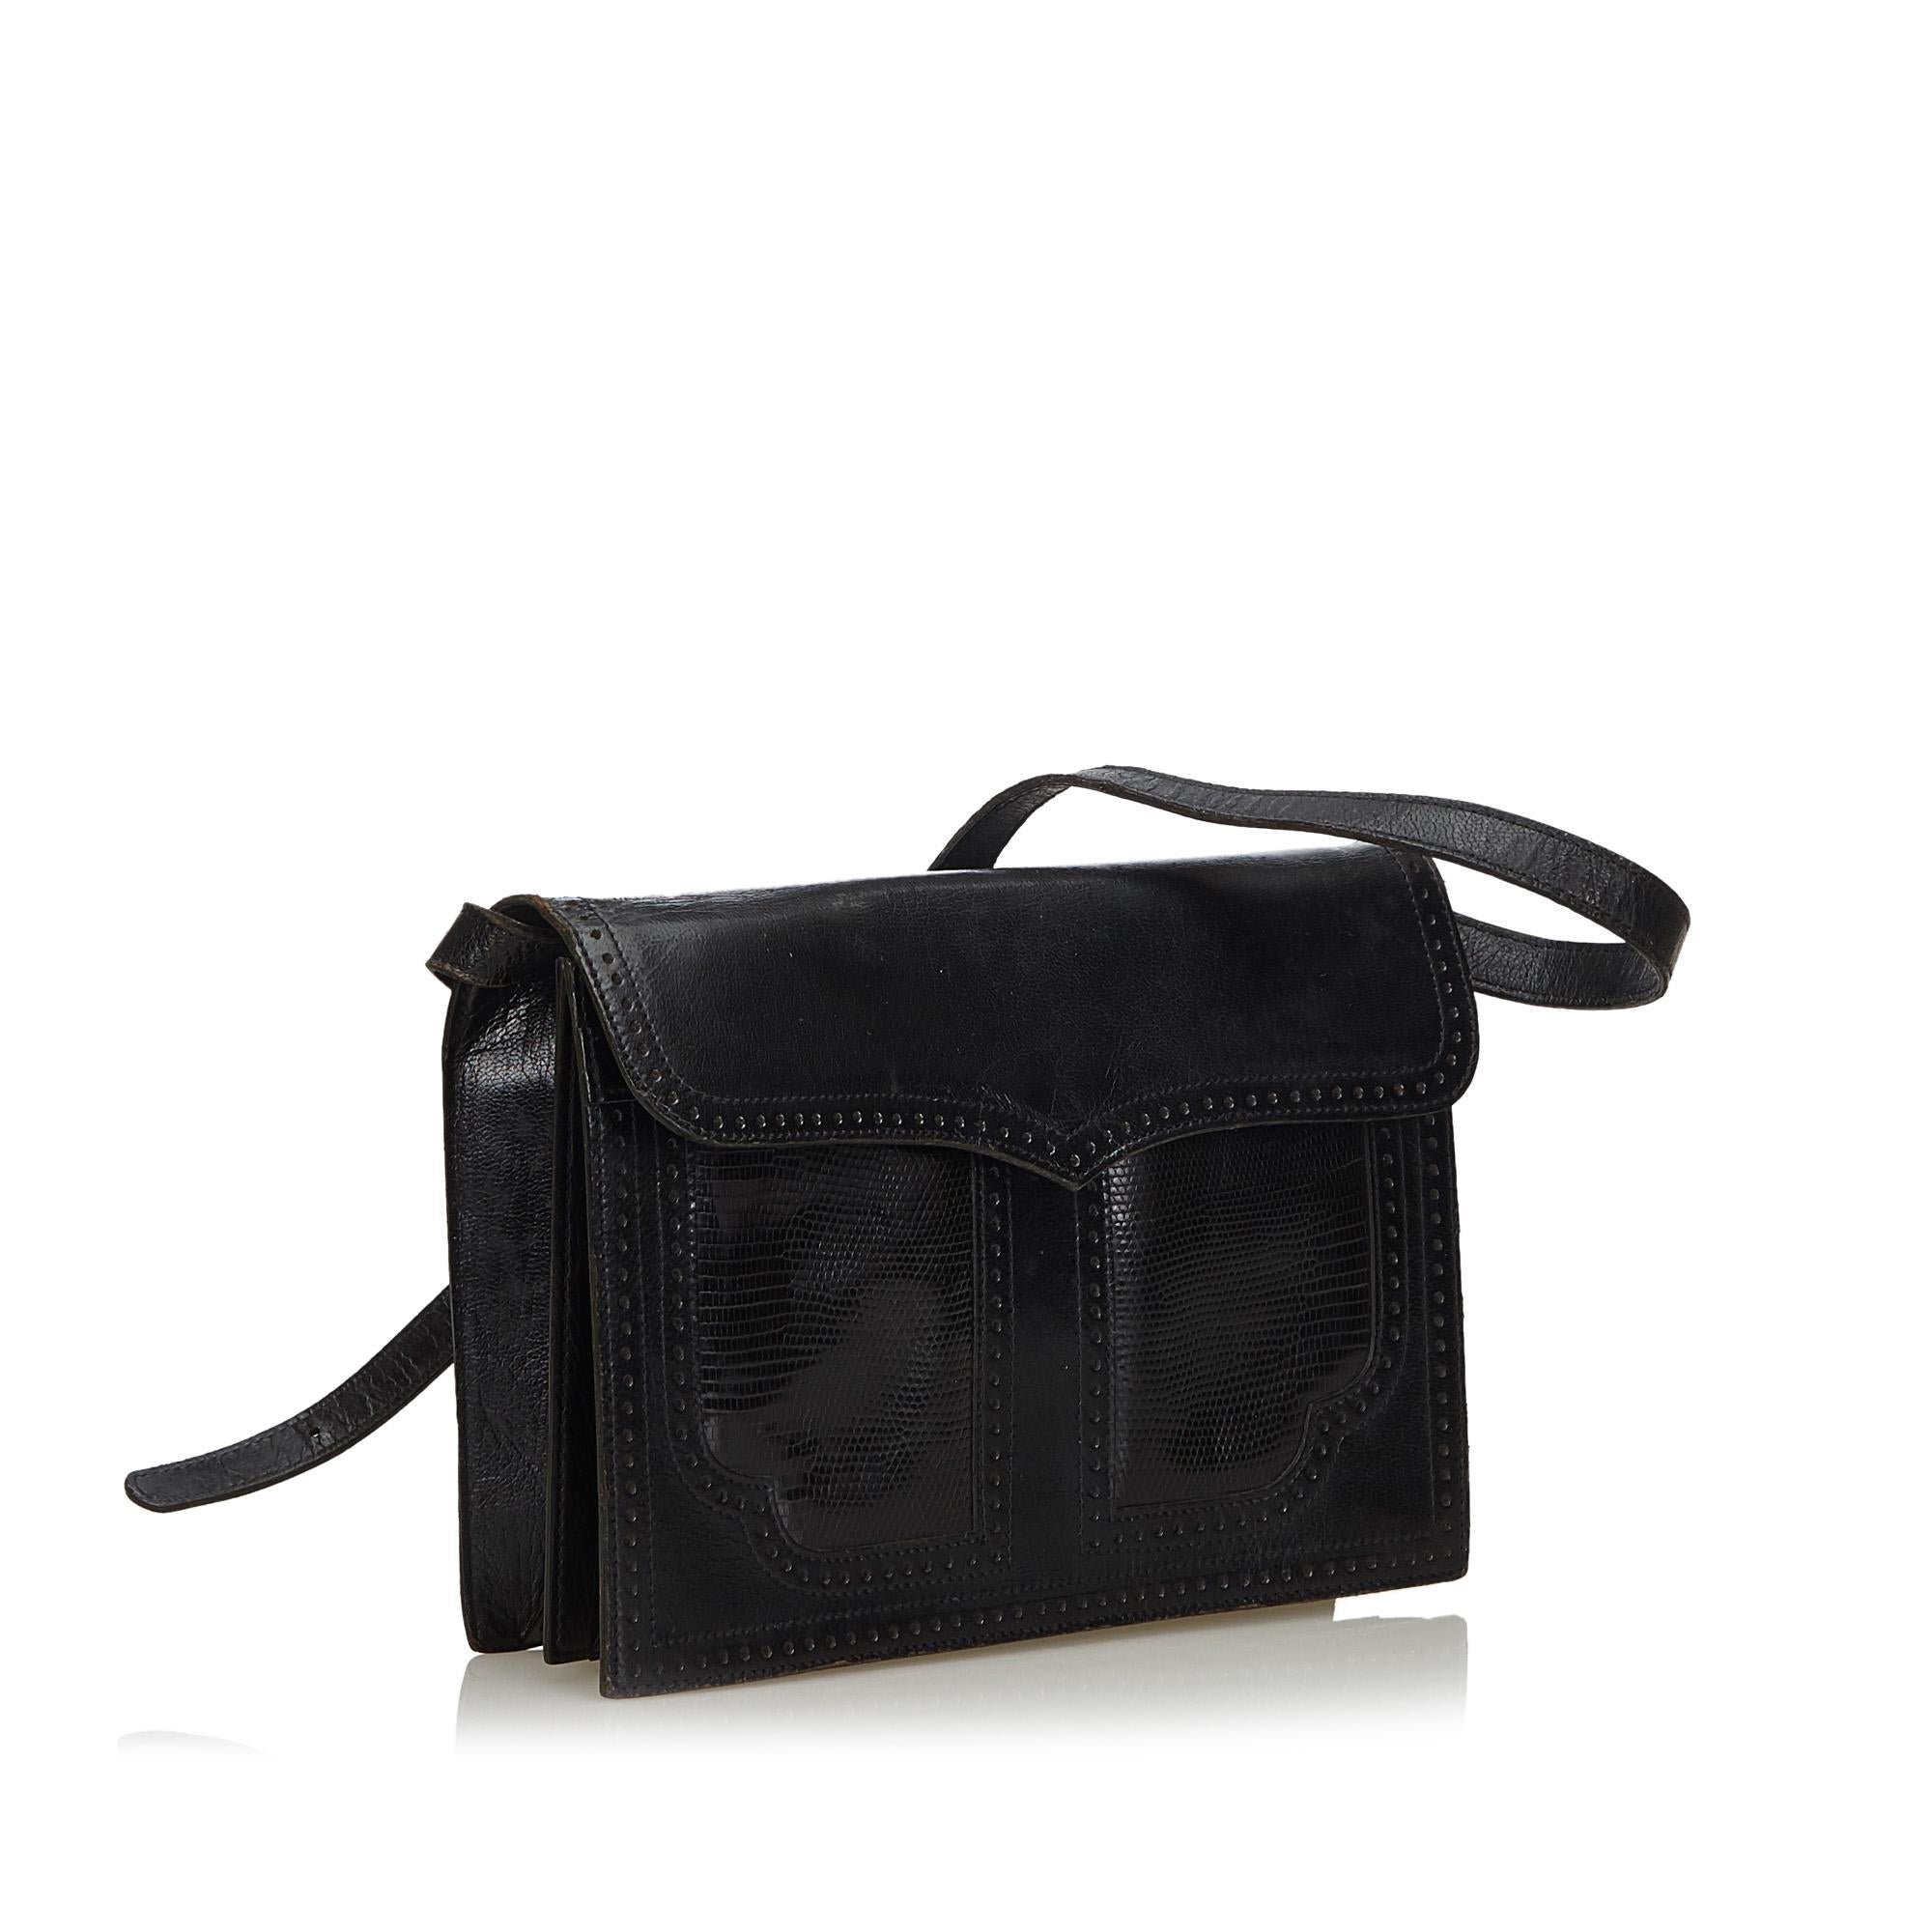 This shoulder bag features a leather body, a flat leather strap, a top flap with a magnetic closure, and interior zip and slip pockets. It carries as B condition rating.

Inclusions: 
This item does not come with inclusions.

Dimensions:
Length: